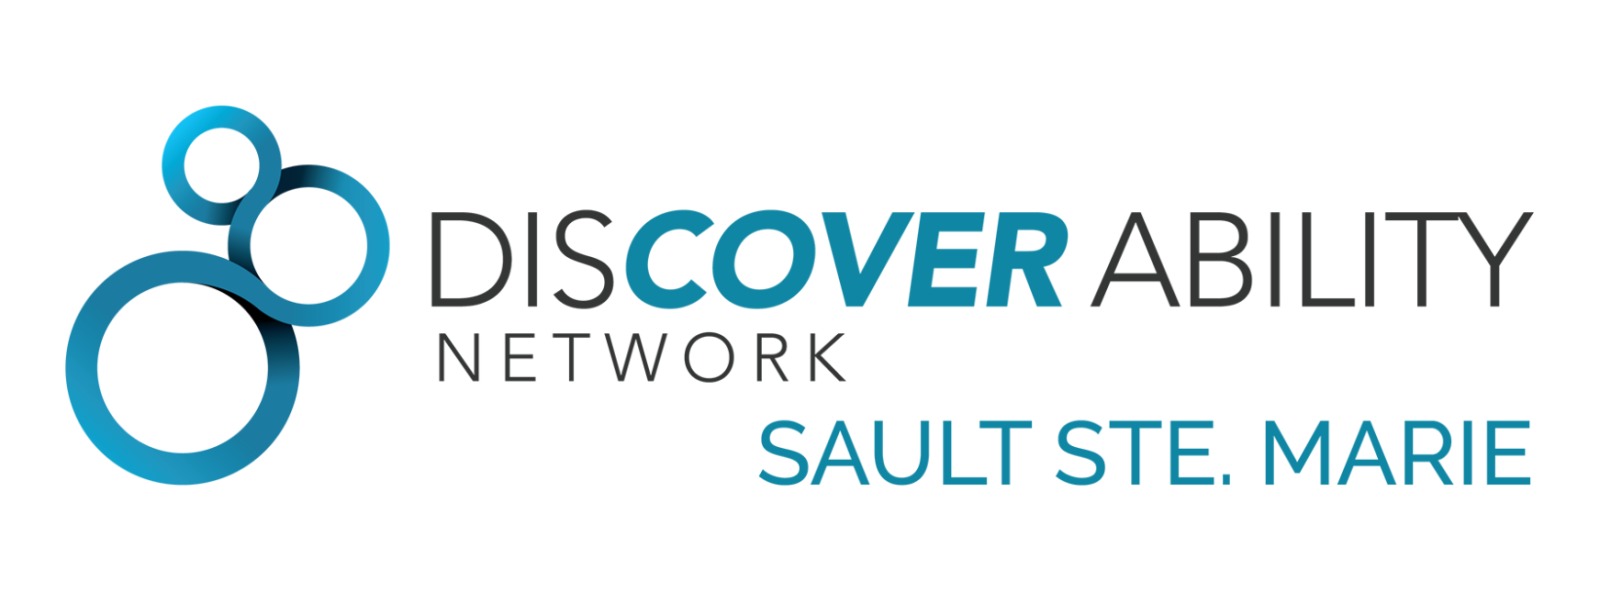 Discover Ability Sault Ste. Marie Region